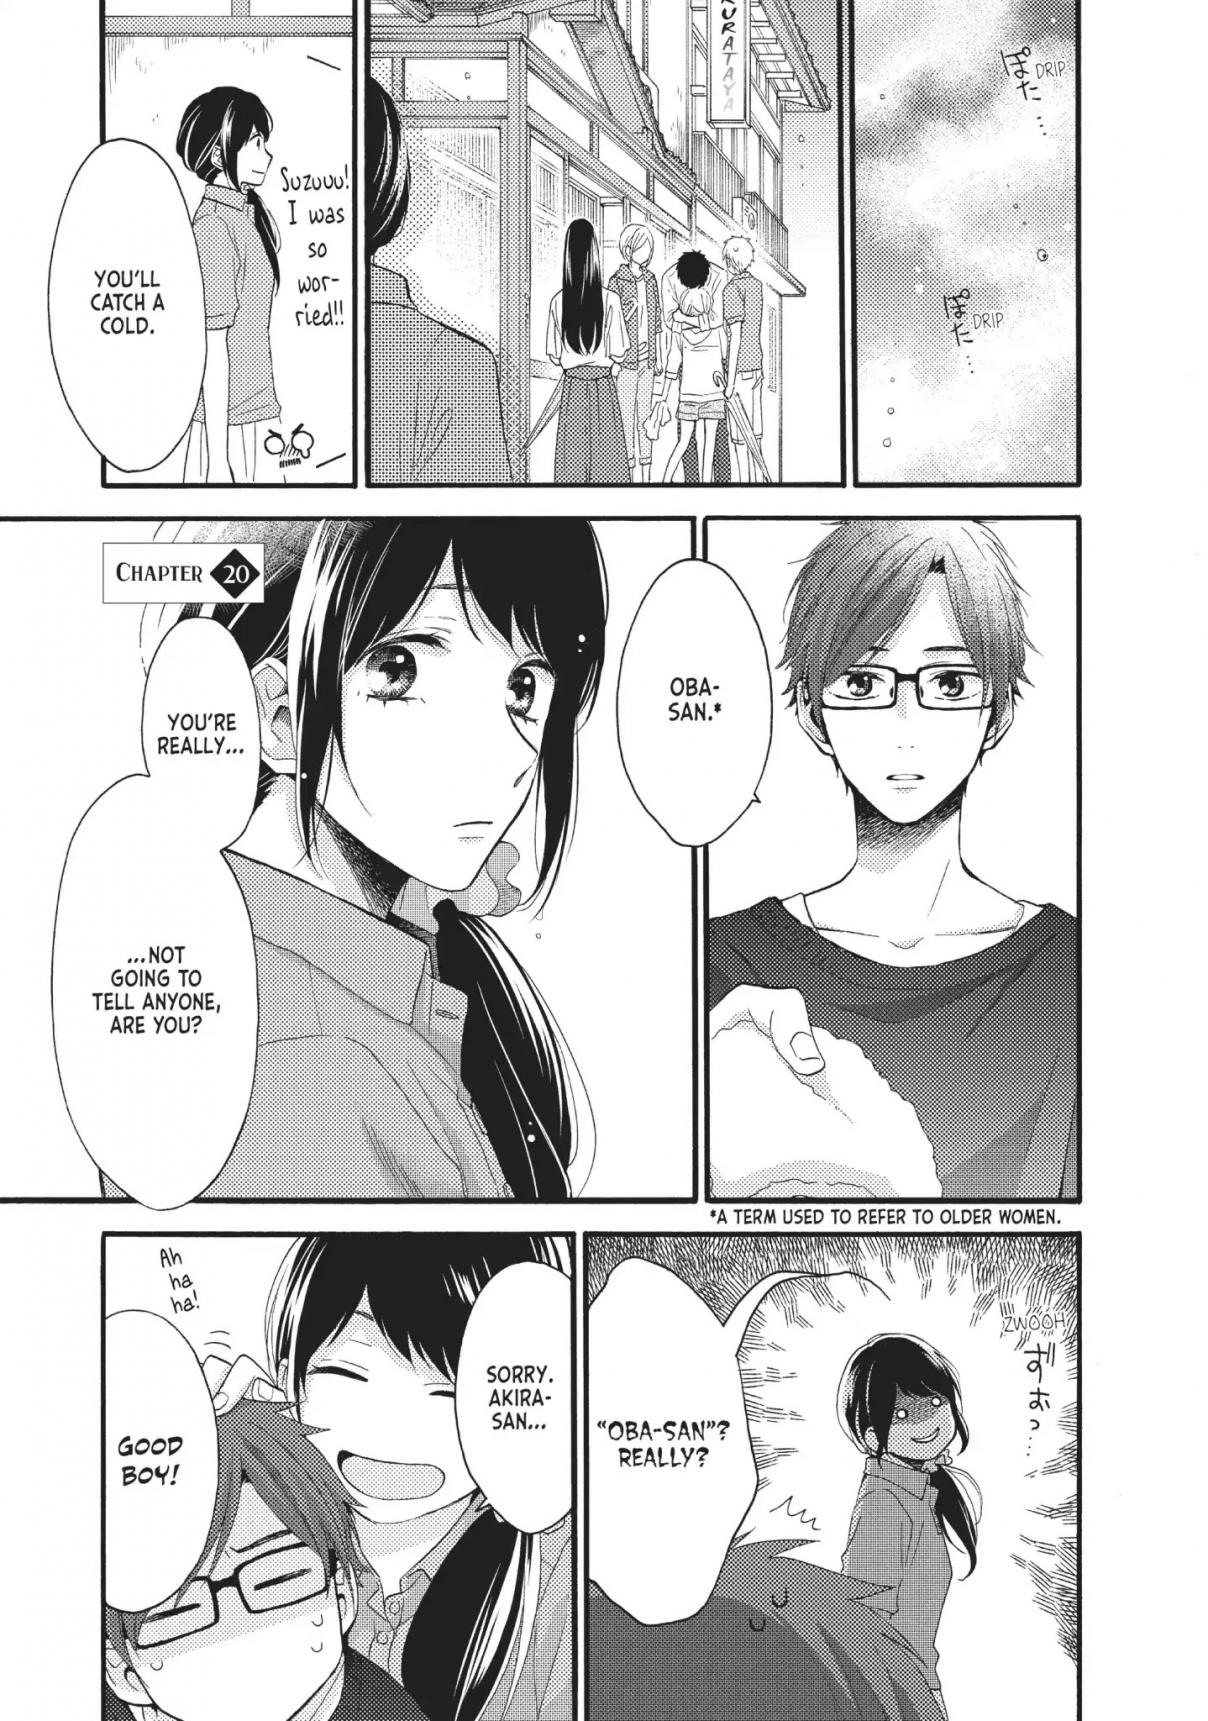 Ohayou, Ibarahime Vol. 5 Ch. 20 Reconciliation